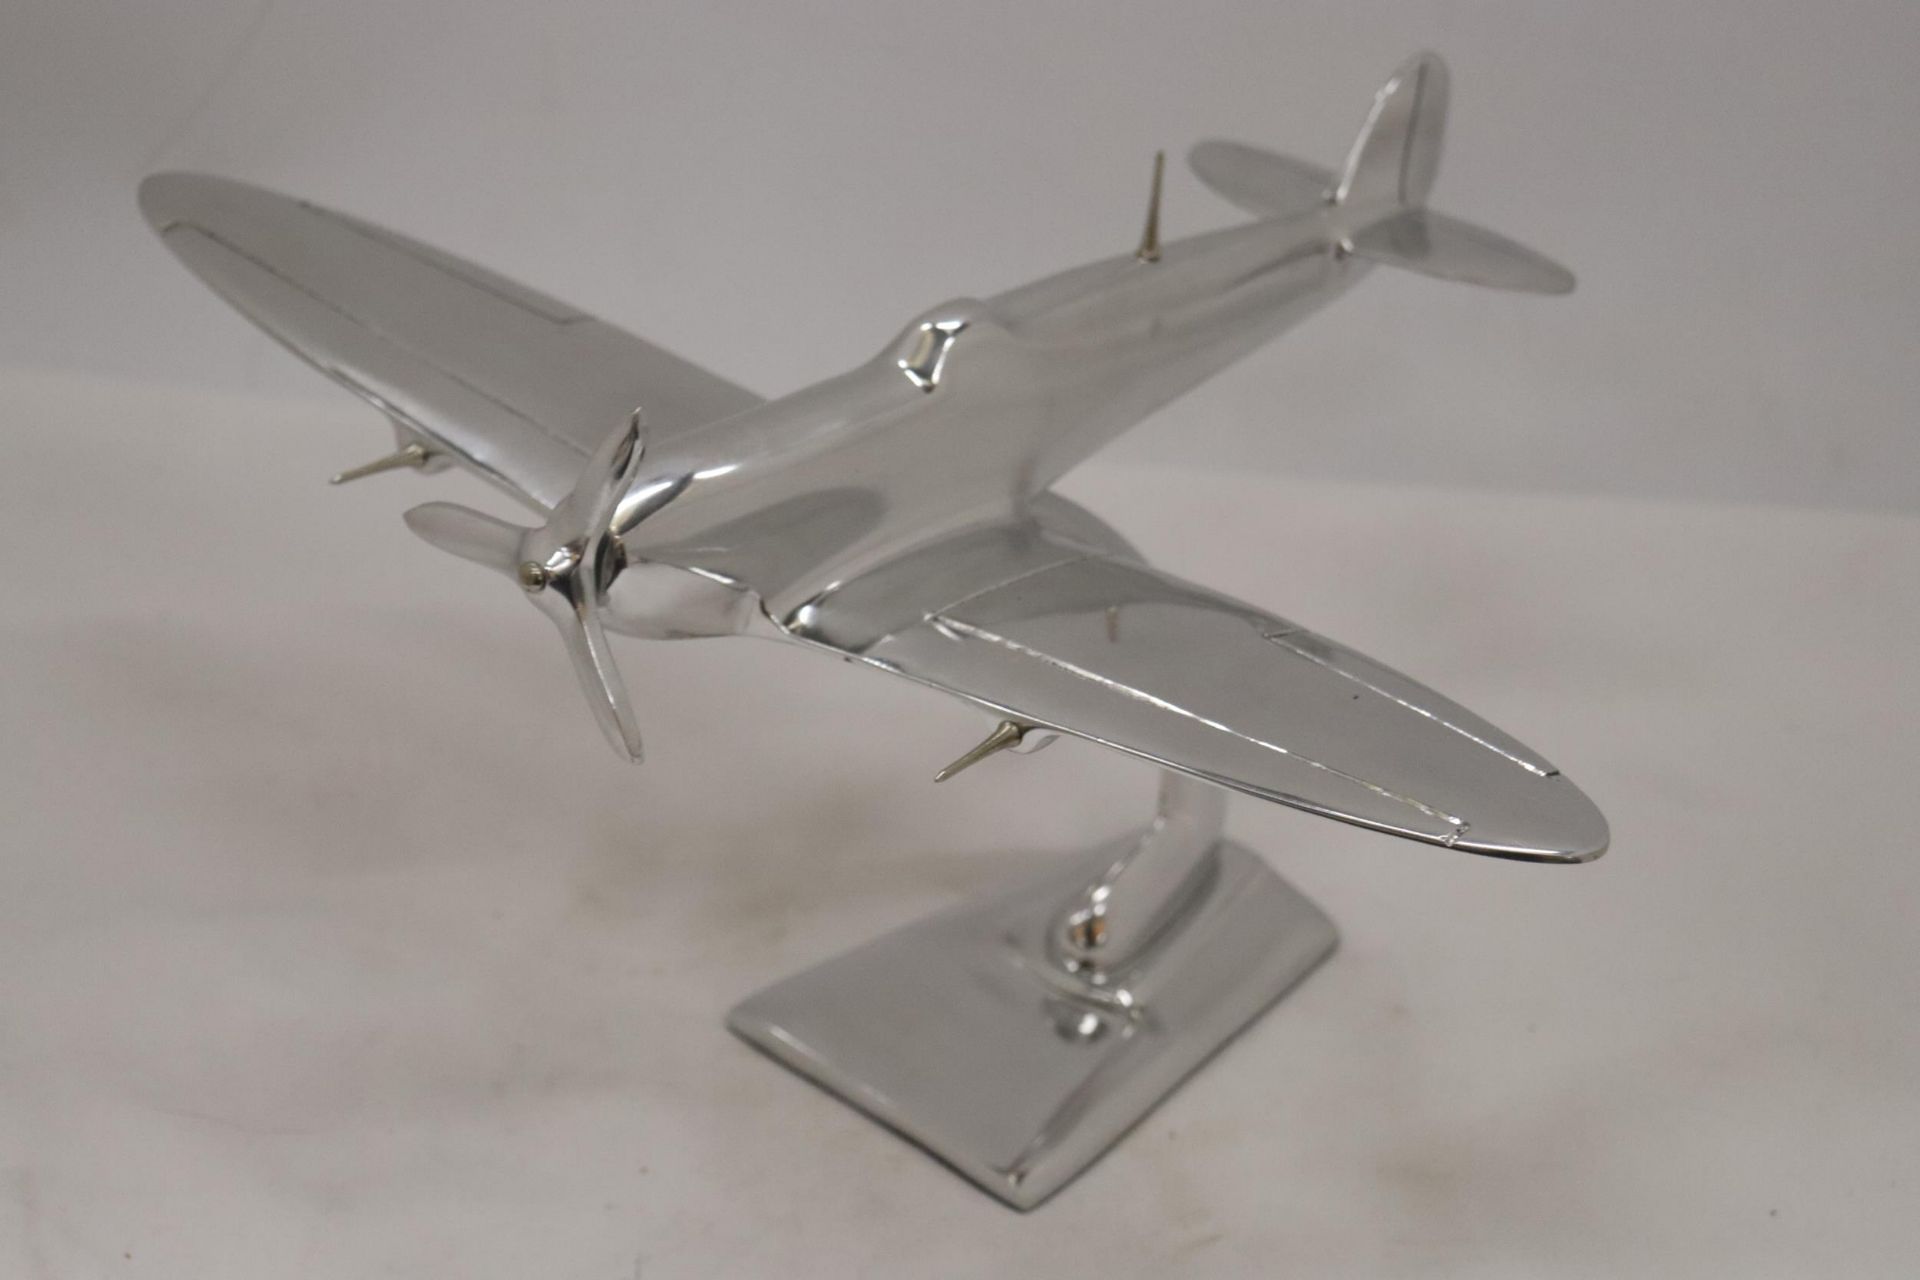 A LARGE CHROME SPITFIRE ON A STAND - Image 5 of 6